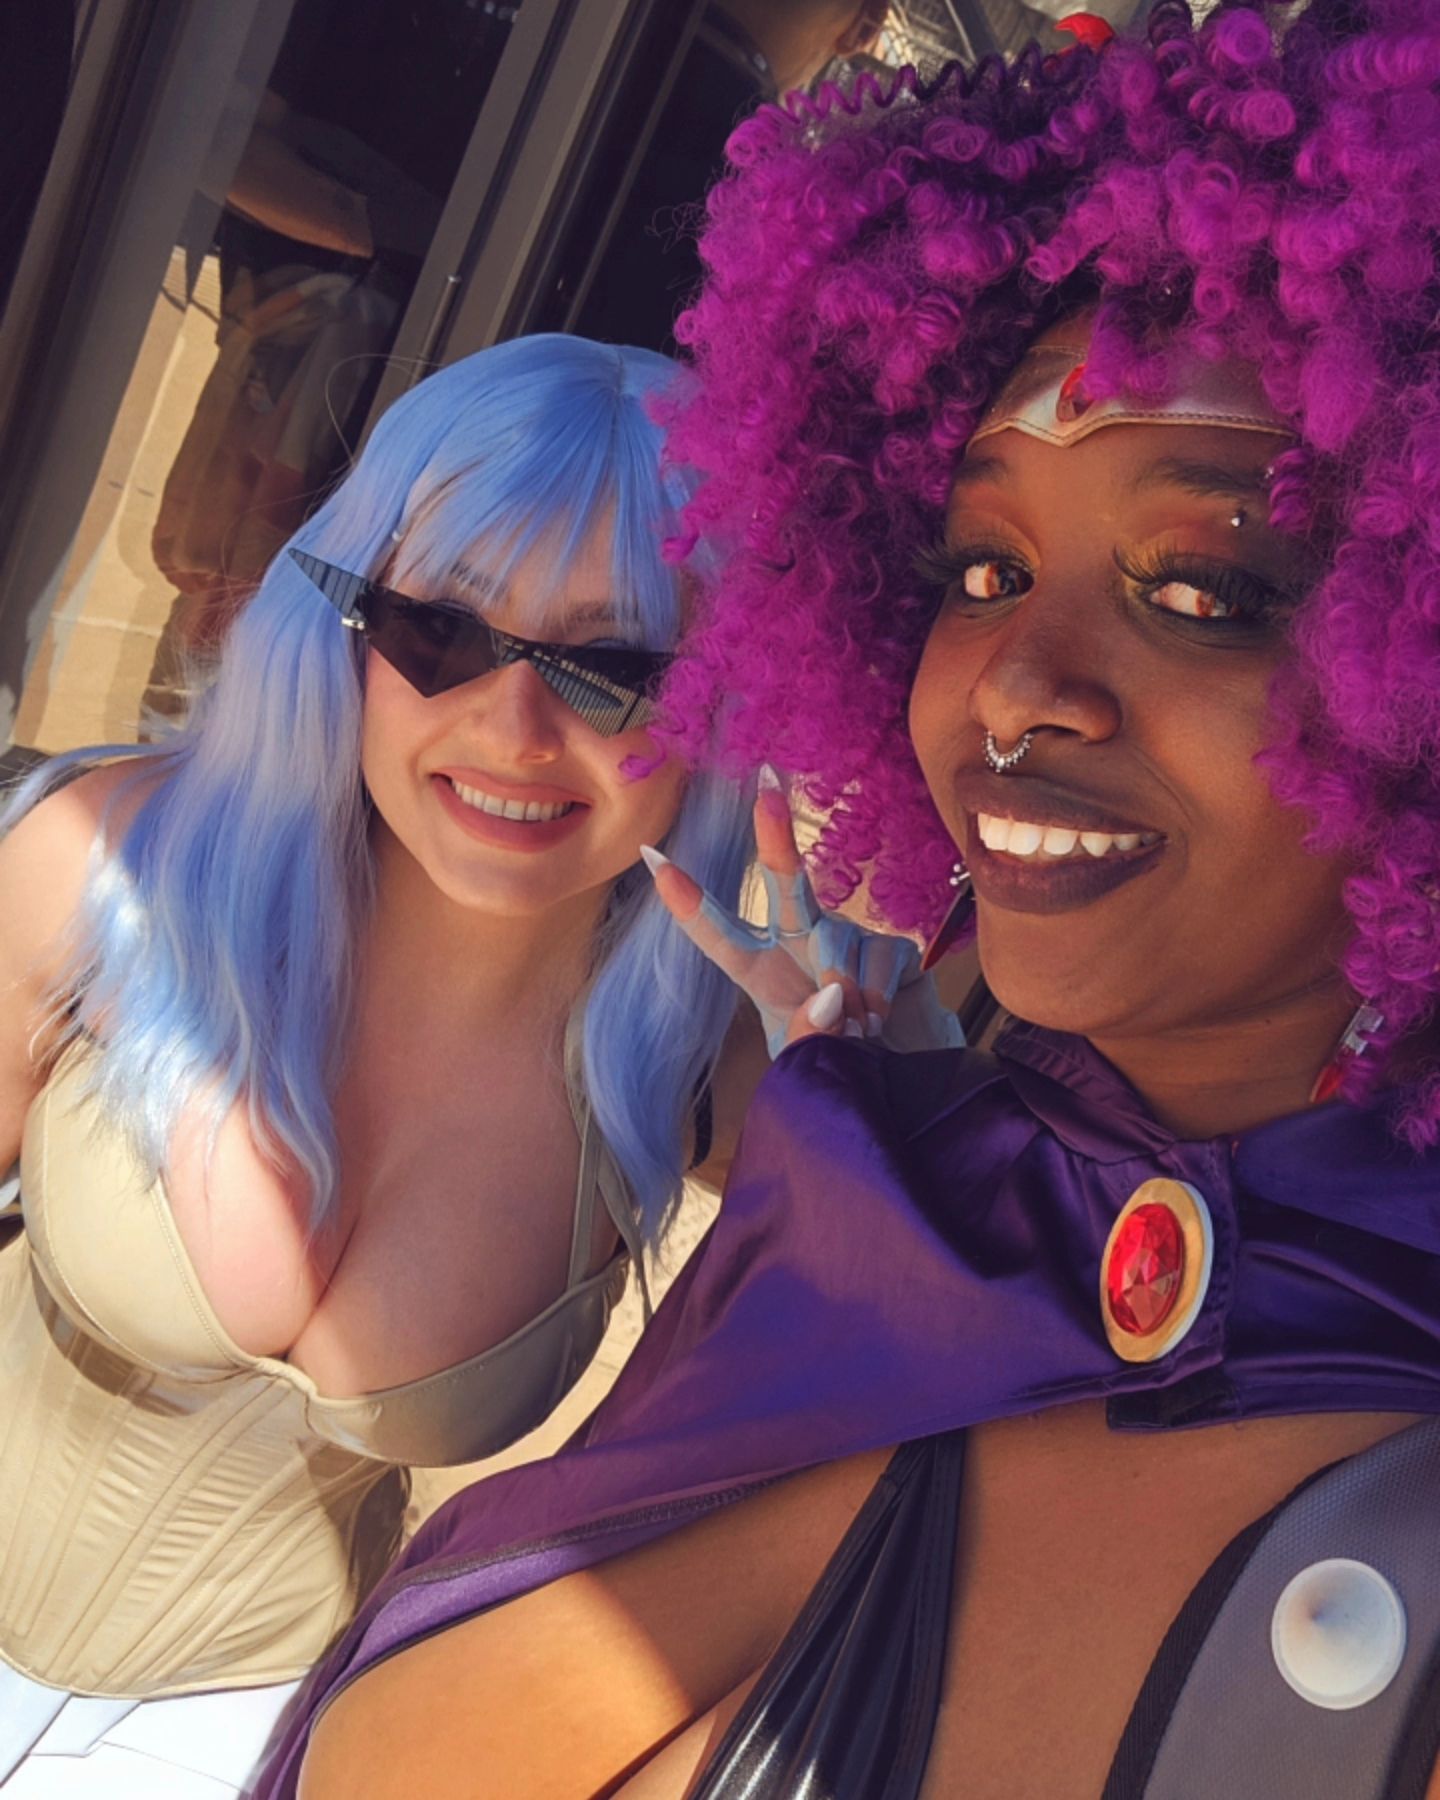 First time in Vegas & my first out of state con in one go?? Hell yeah! I enjoyed attending @tsumi.con 🖤 I'm also happy I got to see con friends, meet new friends, & meet idols too!🥰 ( More pics are coming soon ;) )
.
.
.
.
#raven #ravencosplay #teentitans #teentitanscosplay #dccosplay #dccomics #dcuniverse #tsumicon #confriends #vivalasvegas #bowsette #bowsettecosplay #friendship #goodvibes #protect #waifus #cosplaybabe #blackcosplayers #goth